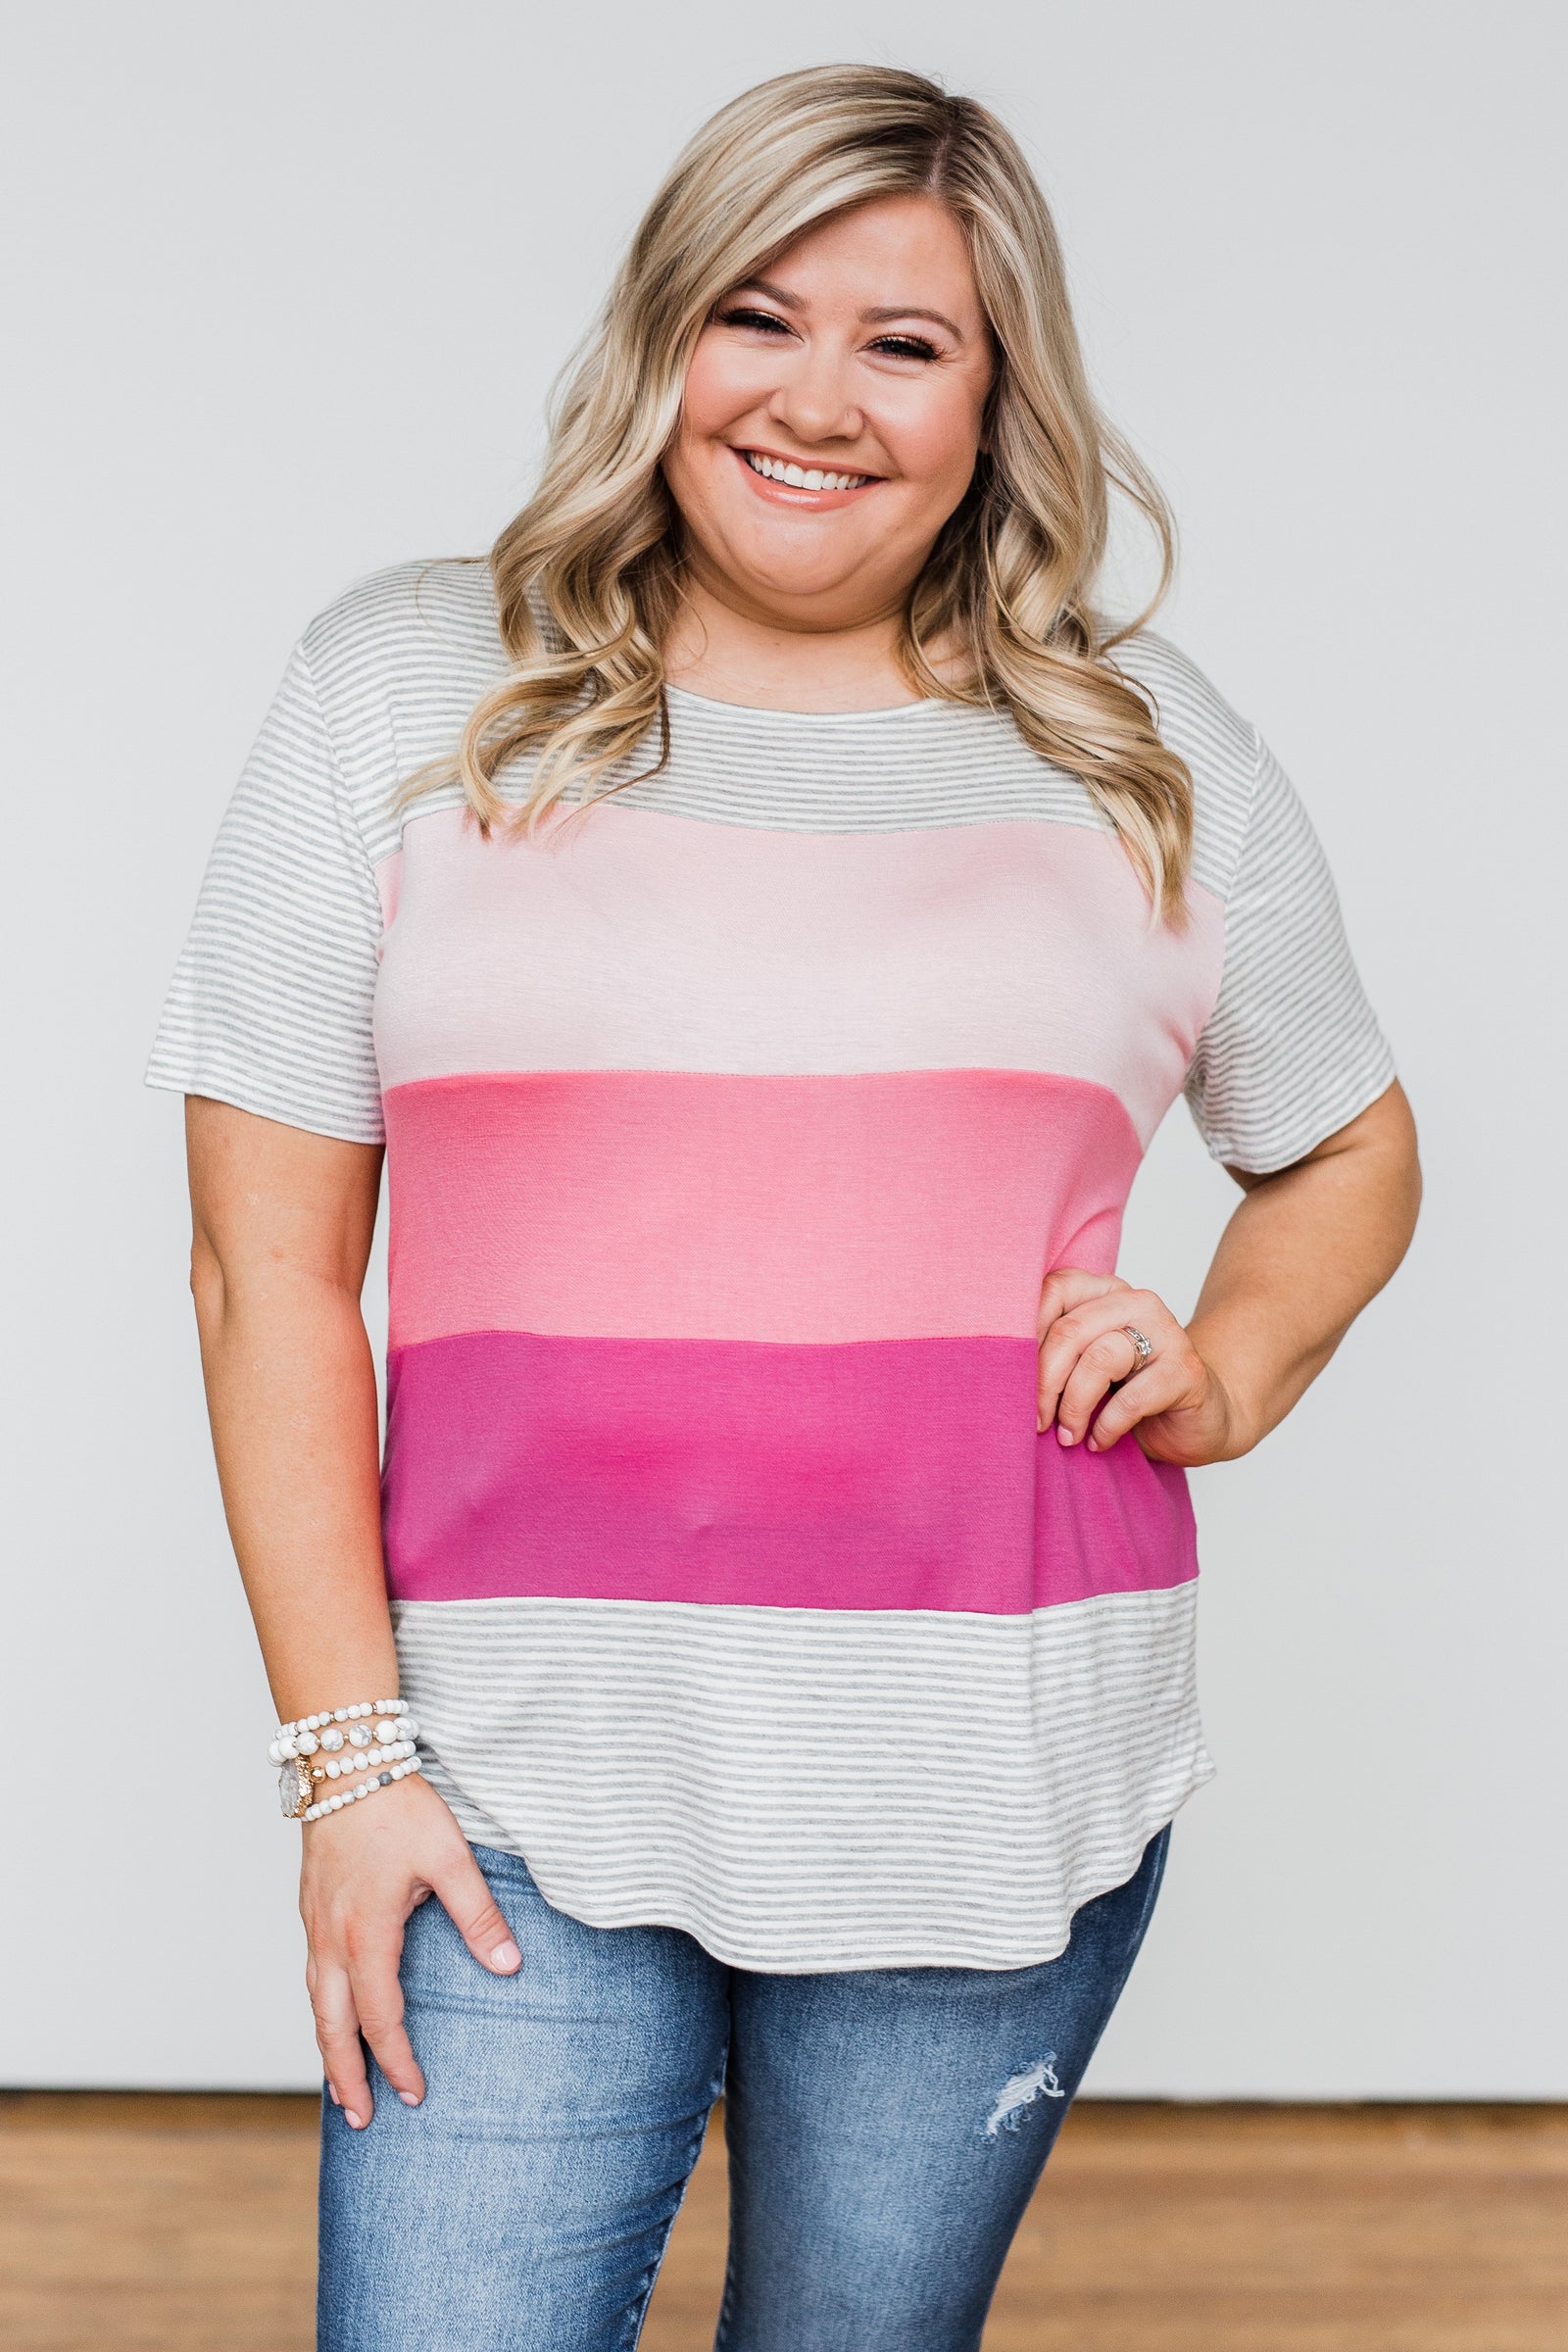 One Day At A Time Striped Color Block Top- Shades of Pink